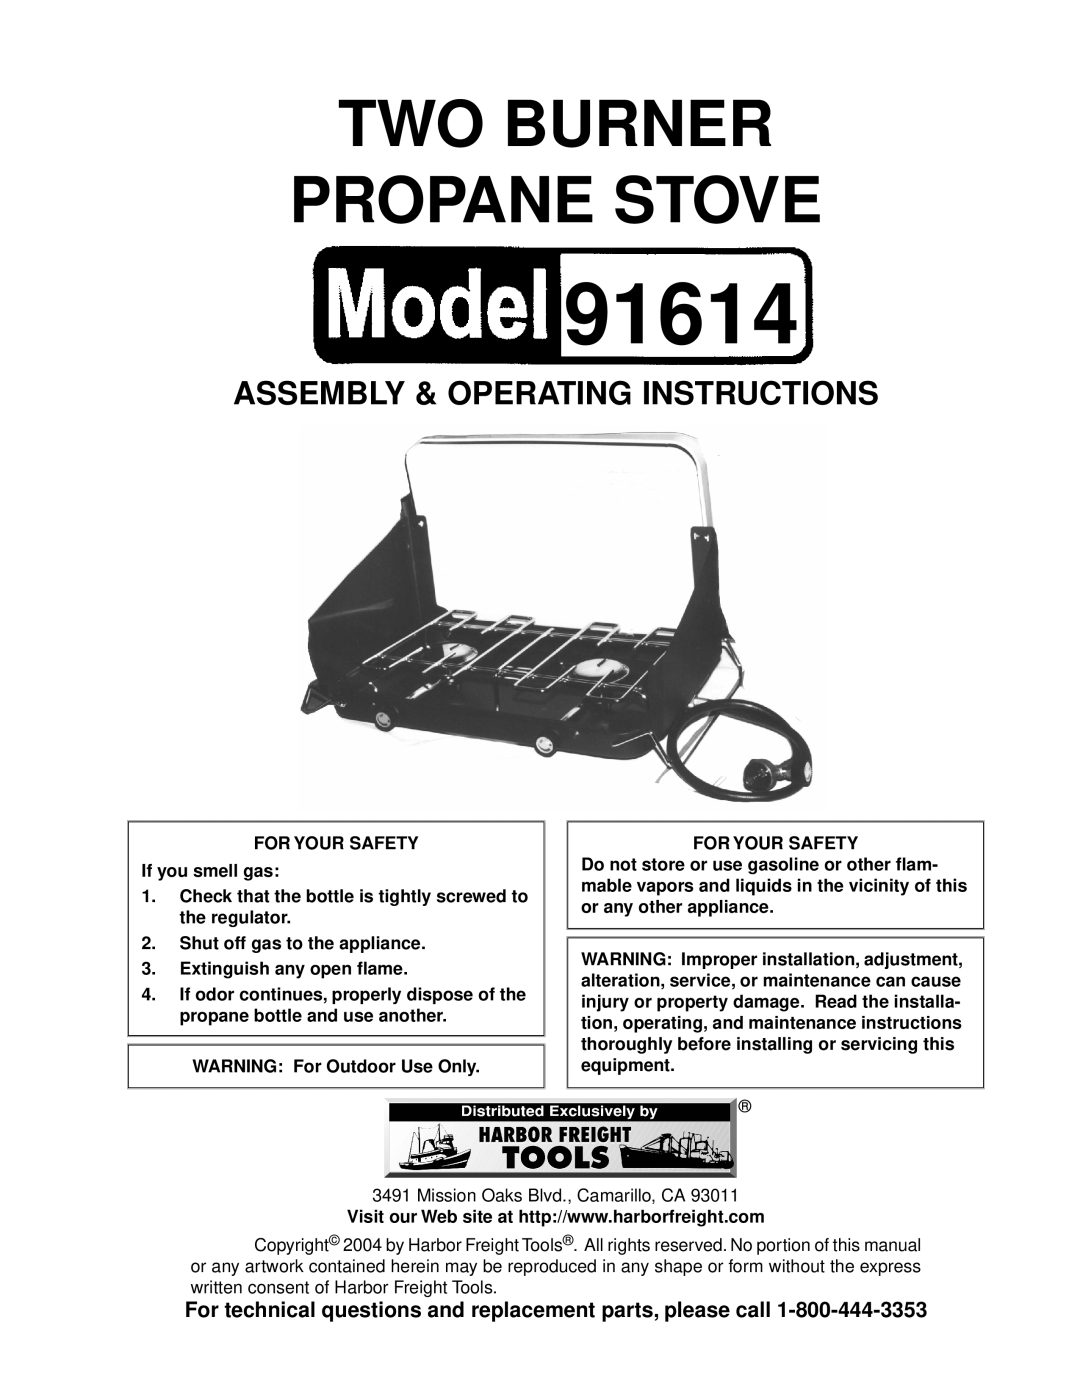 Harbor Freight Tools 91614 manual For technical questions and replacement parts, please call, Two Burner Propane Stove 